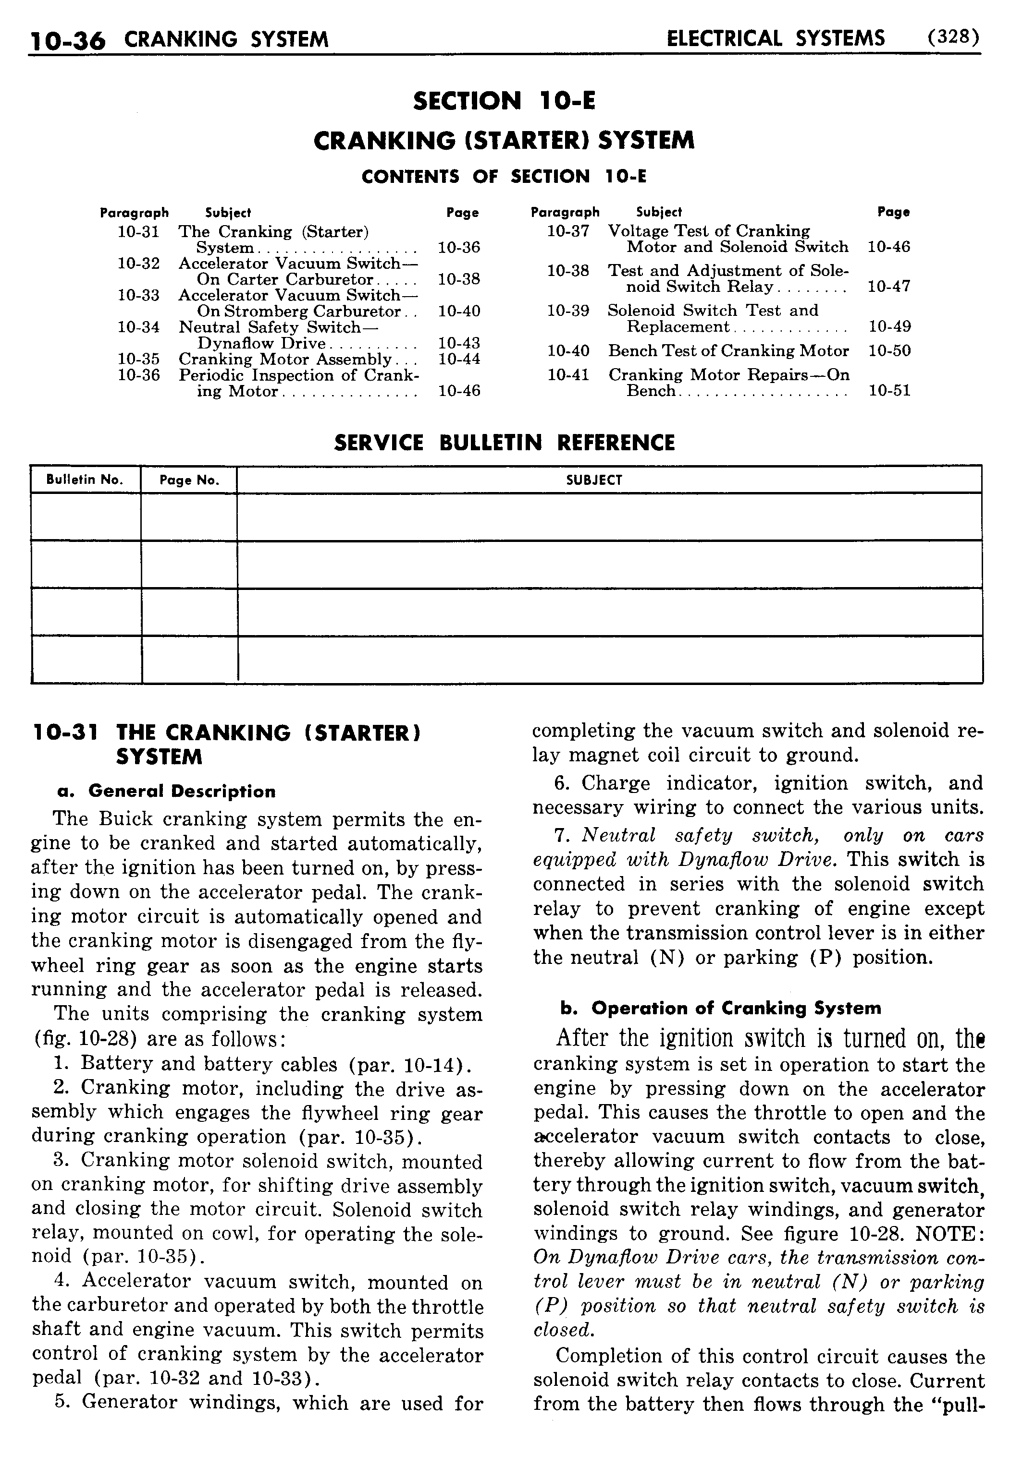 n_11 1951 Buick Shop Manual - Electrical Systems-036-036.jpg